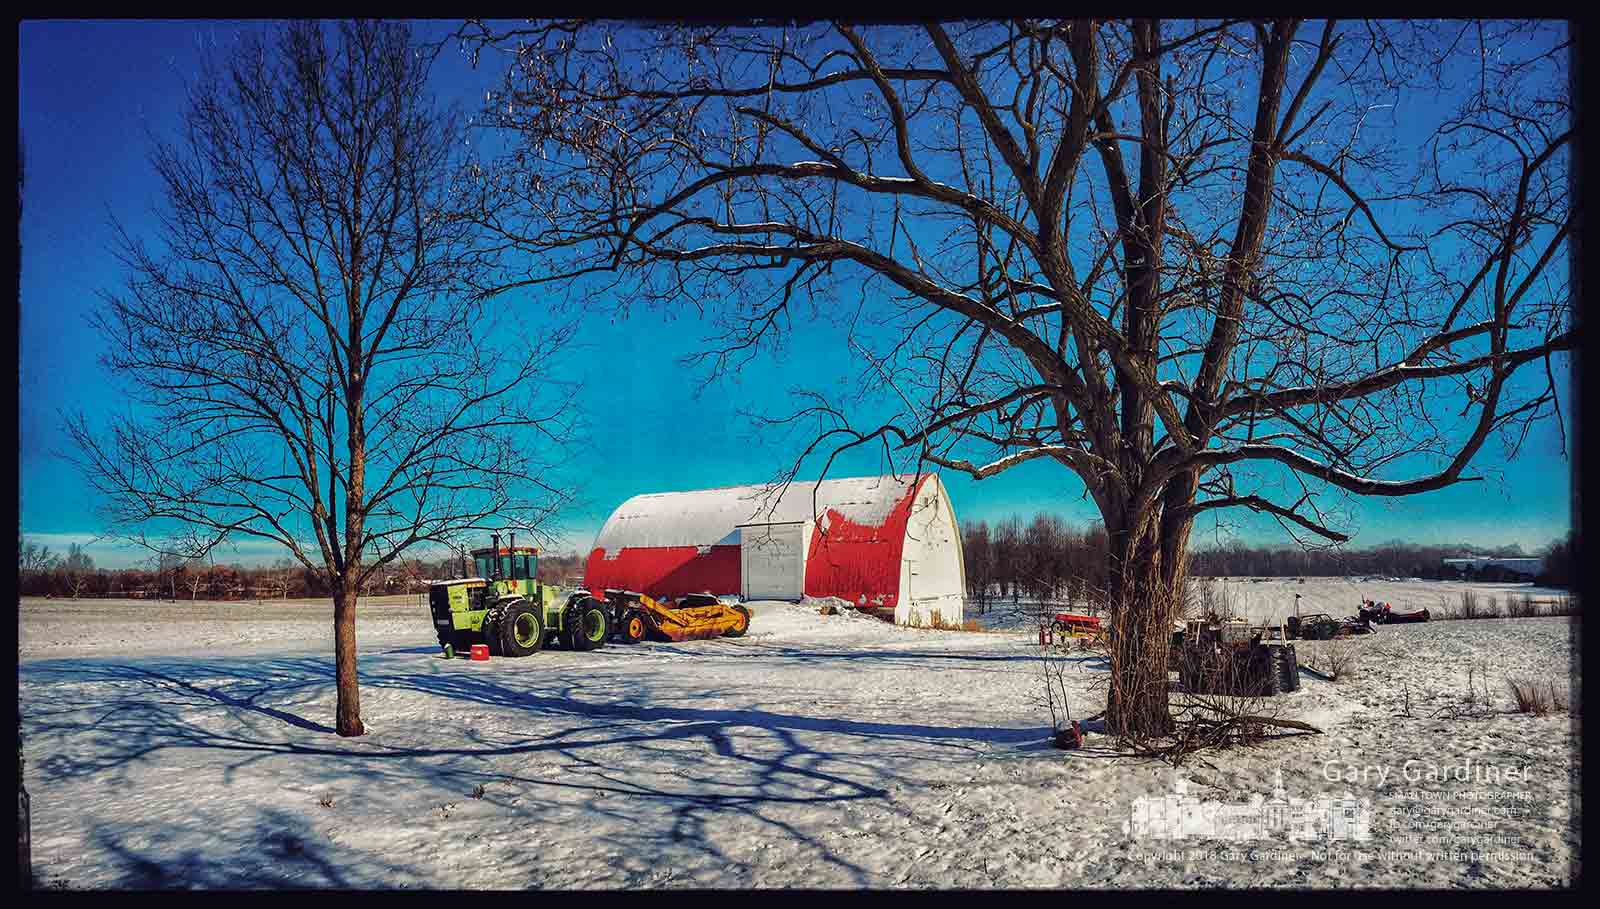 The tractor, barn, and bee hives sit in a blanket of snow on the Braun Farm property in Westerville, Ohio. My Final Photo for Jan. 2, 2018.